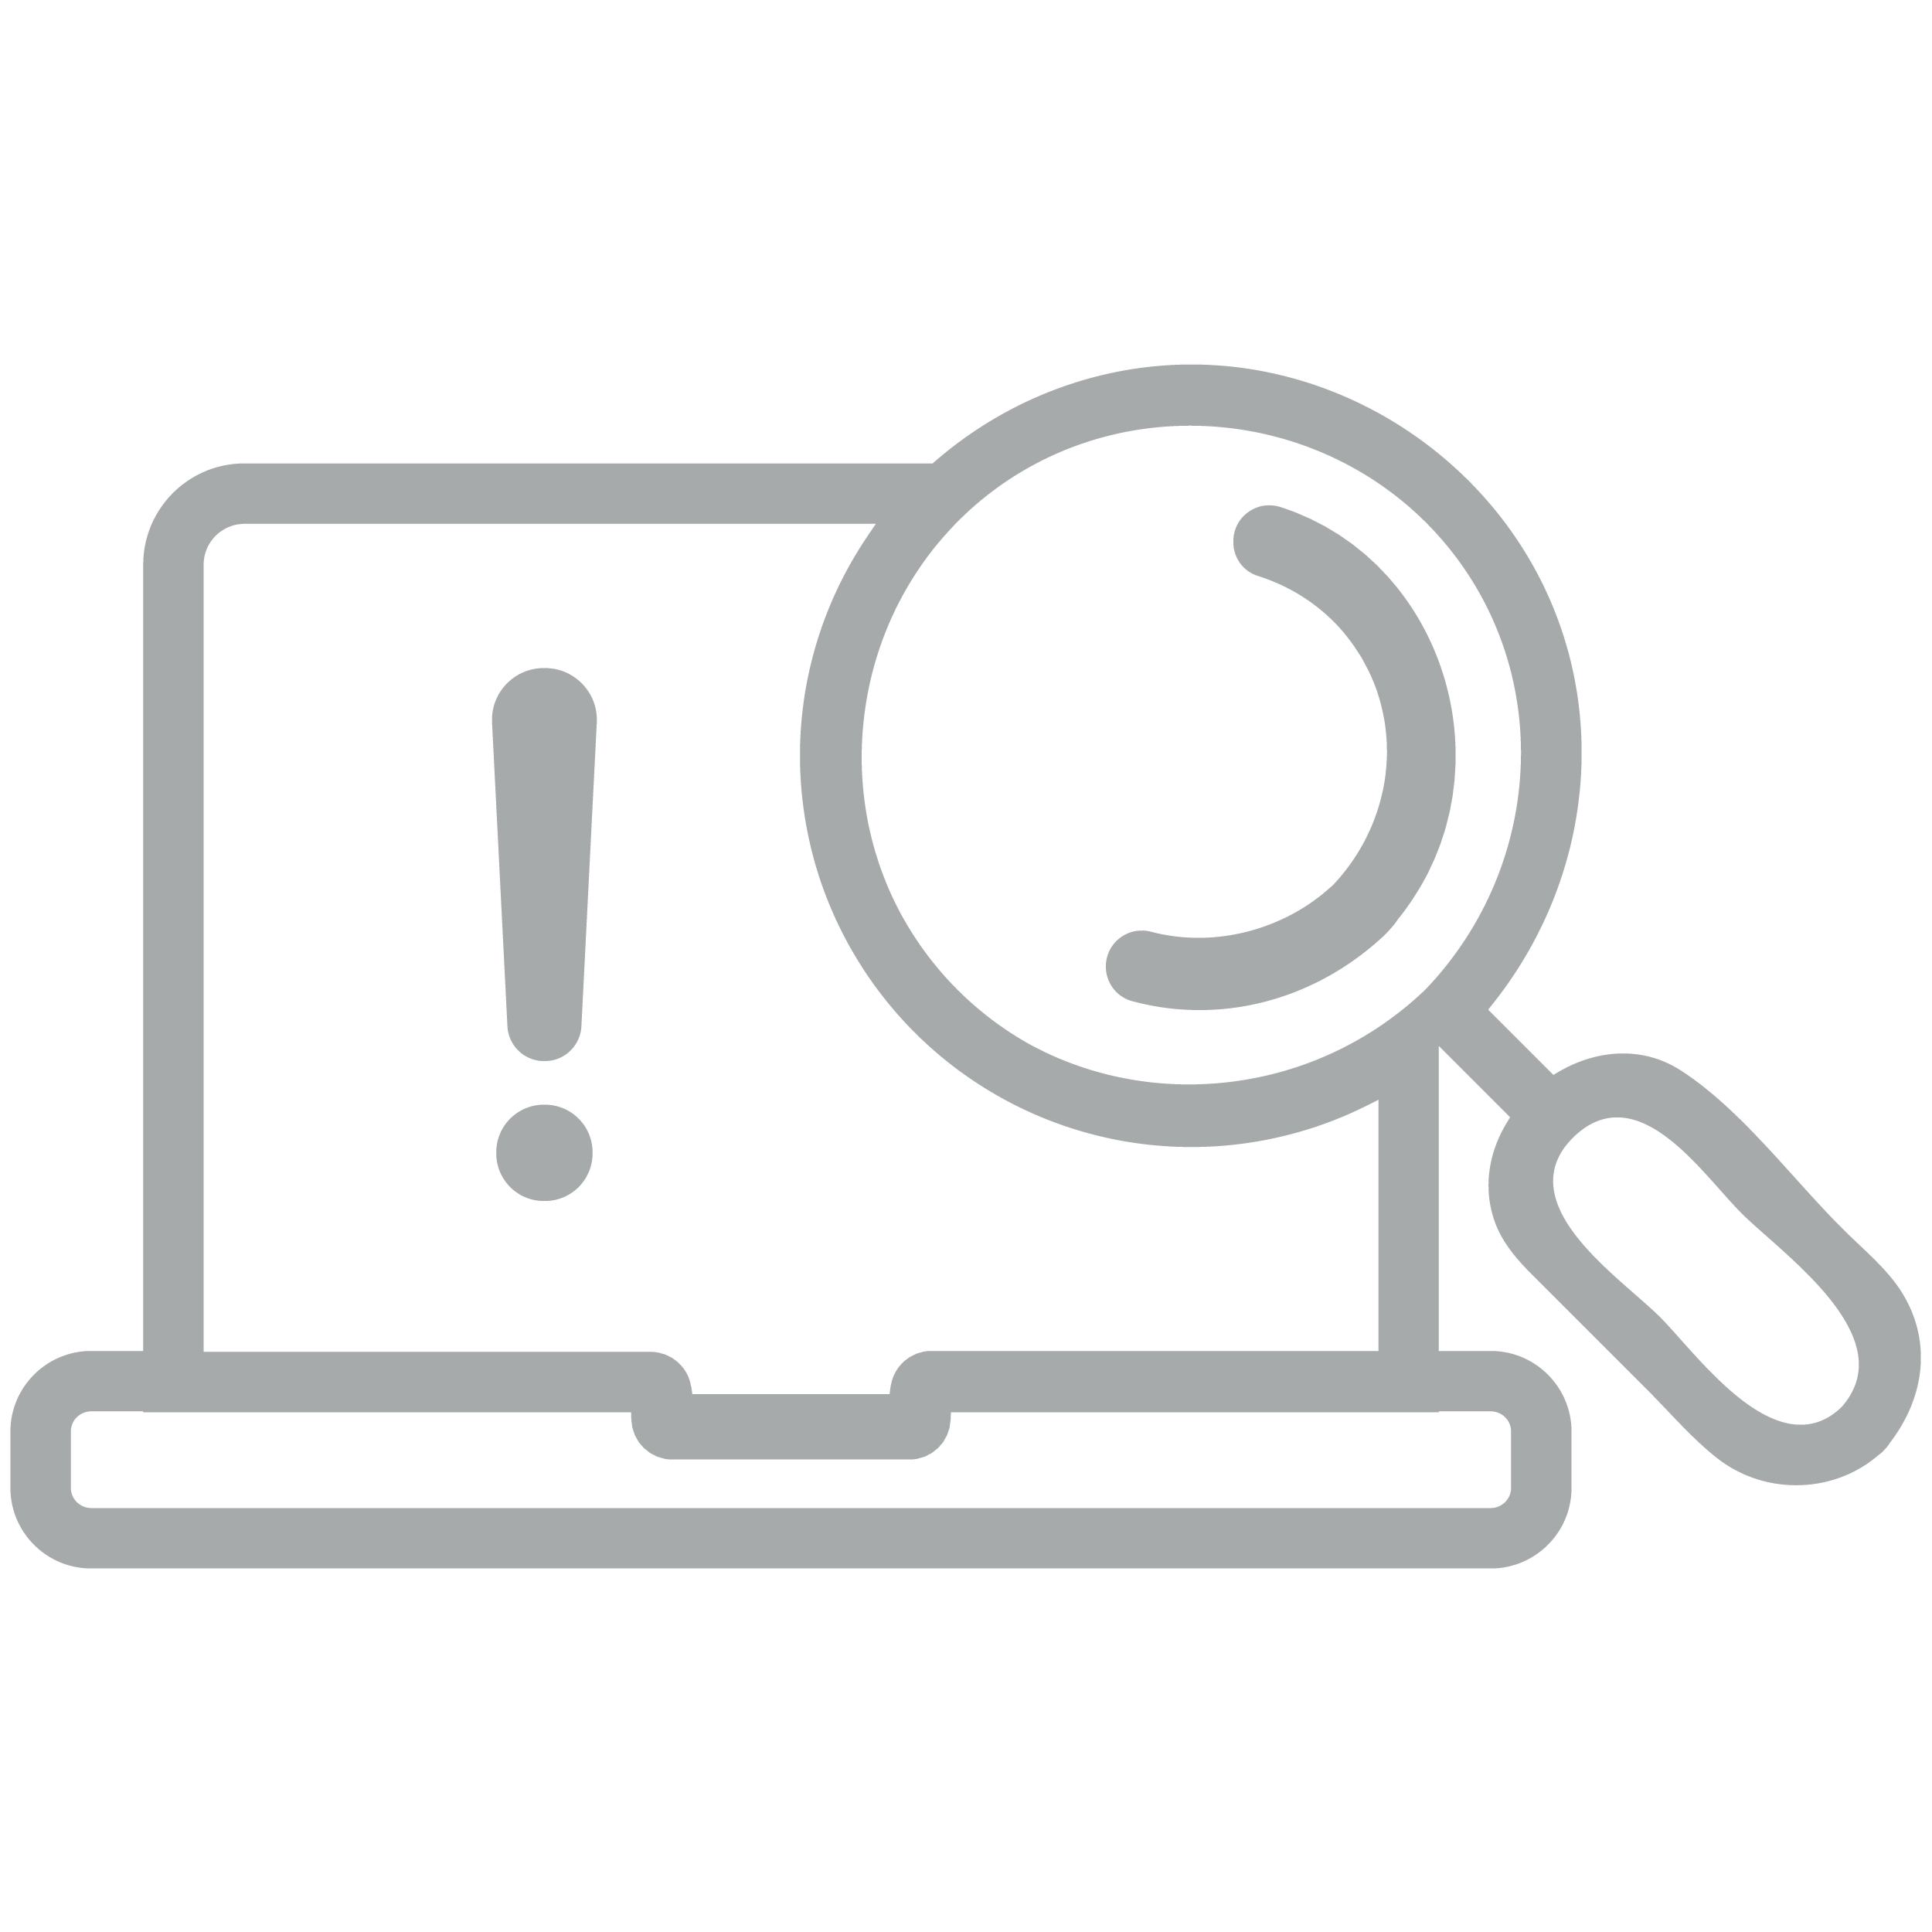 An icon of an open laptop with a magnifying glass superimposed upon it